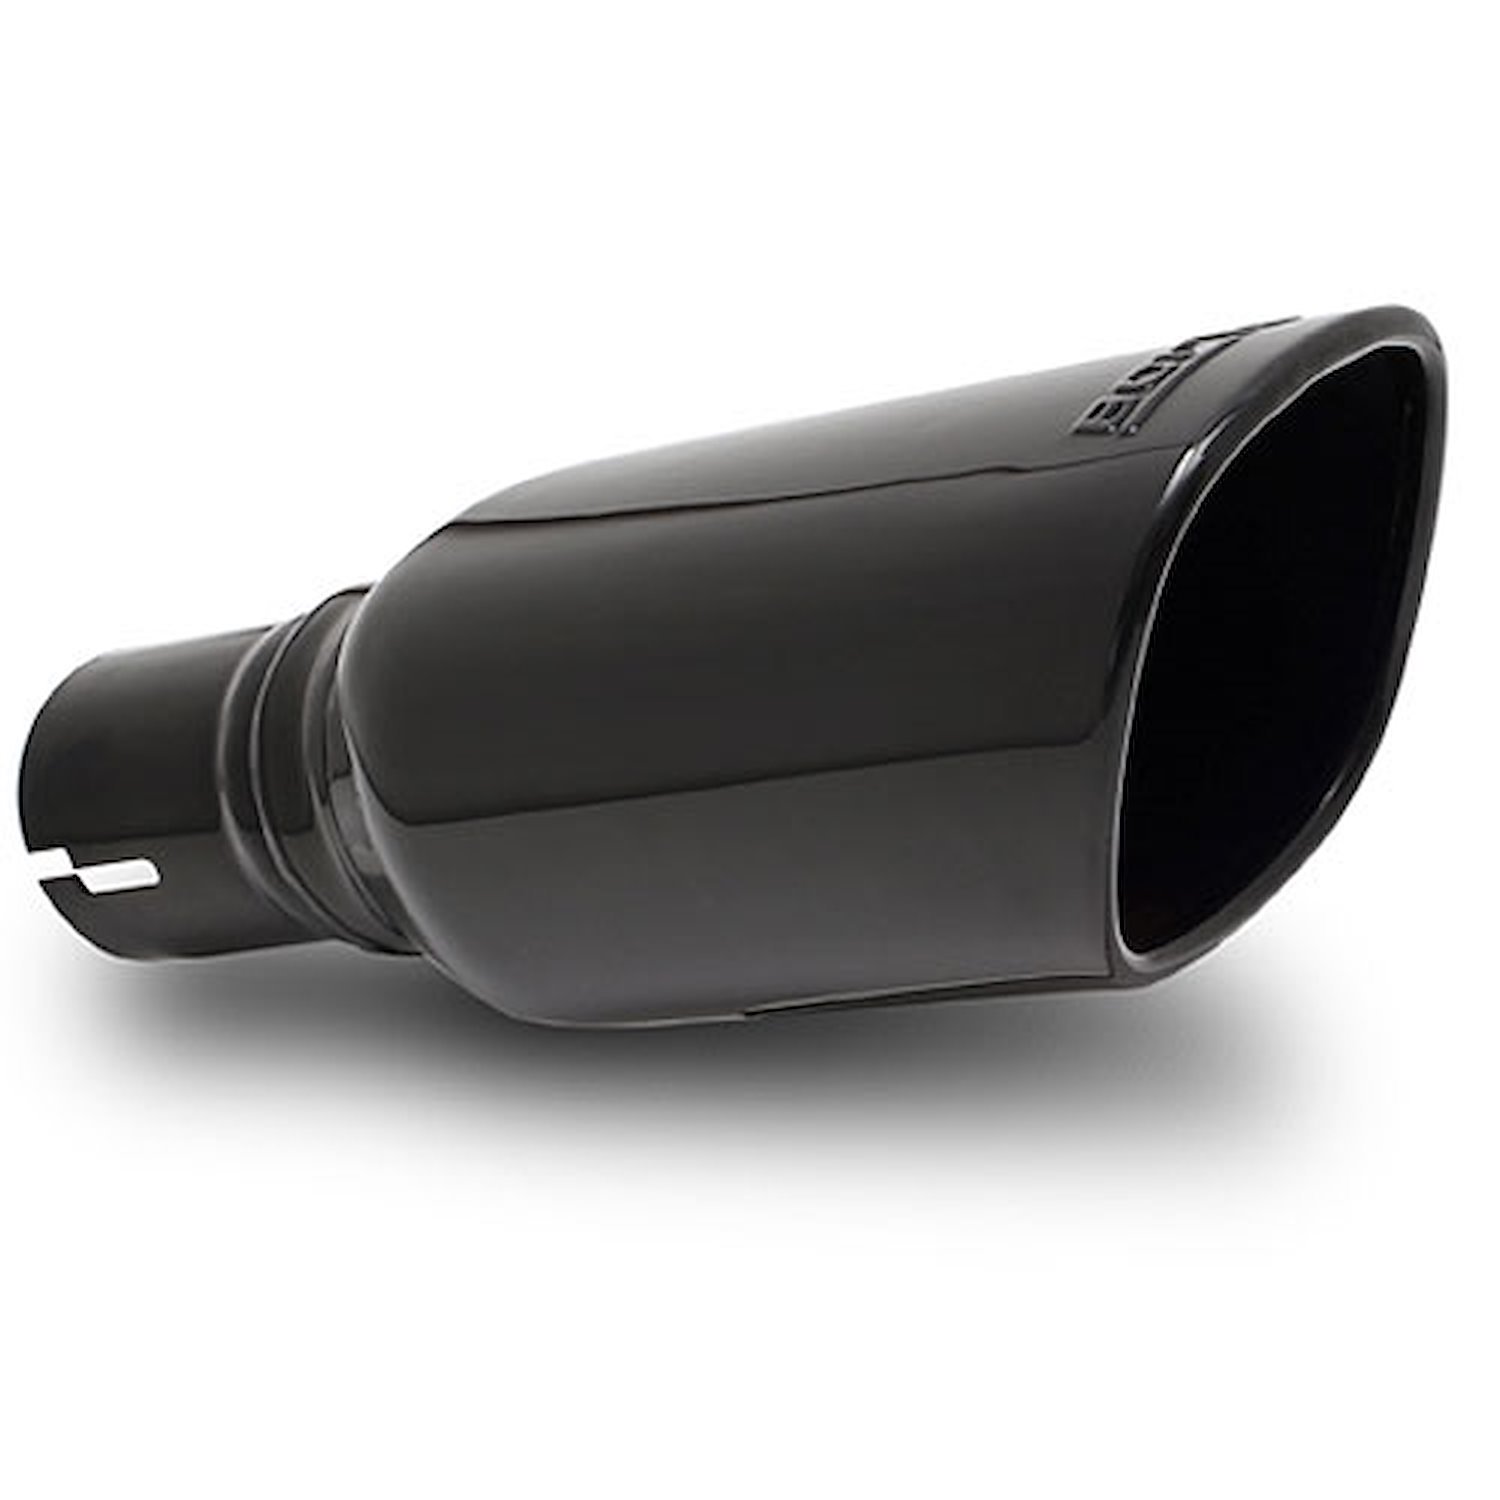 Black Chrome Exhaust Tip Outlet Size: 3.5" x 3.28"